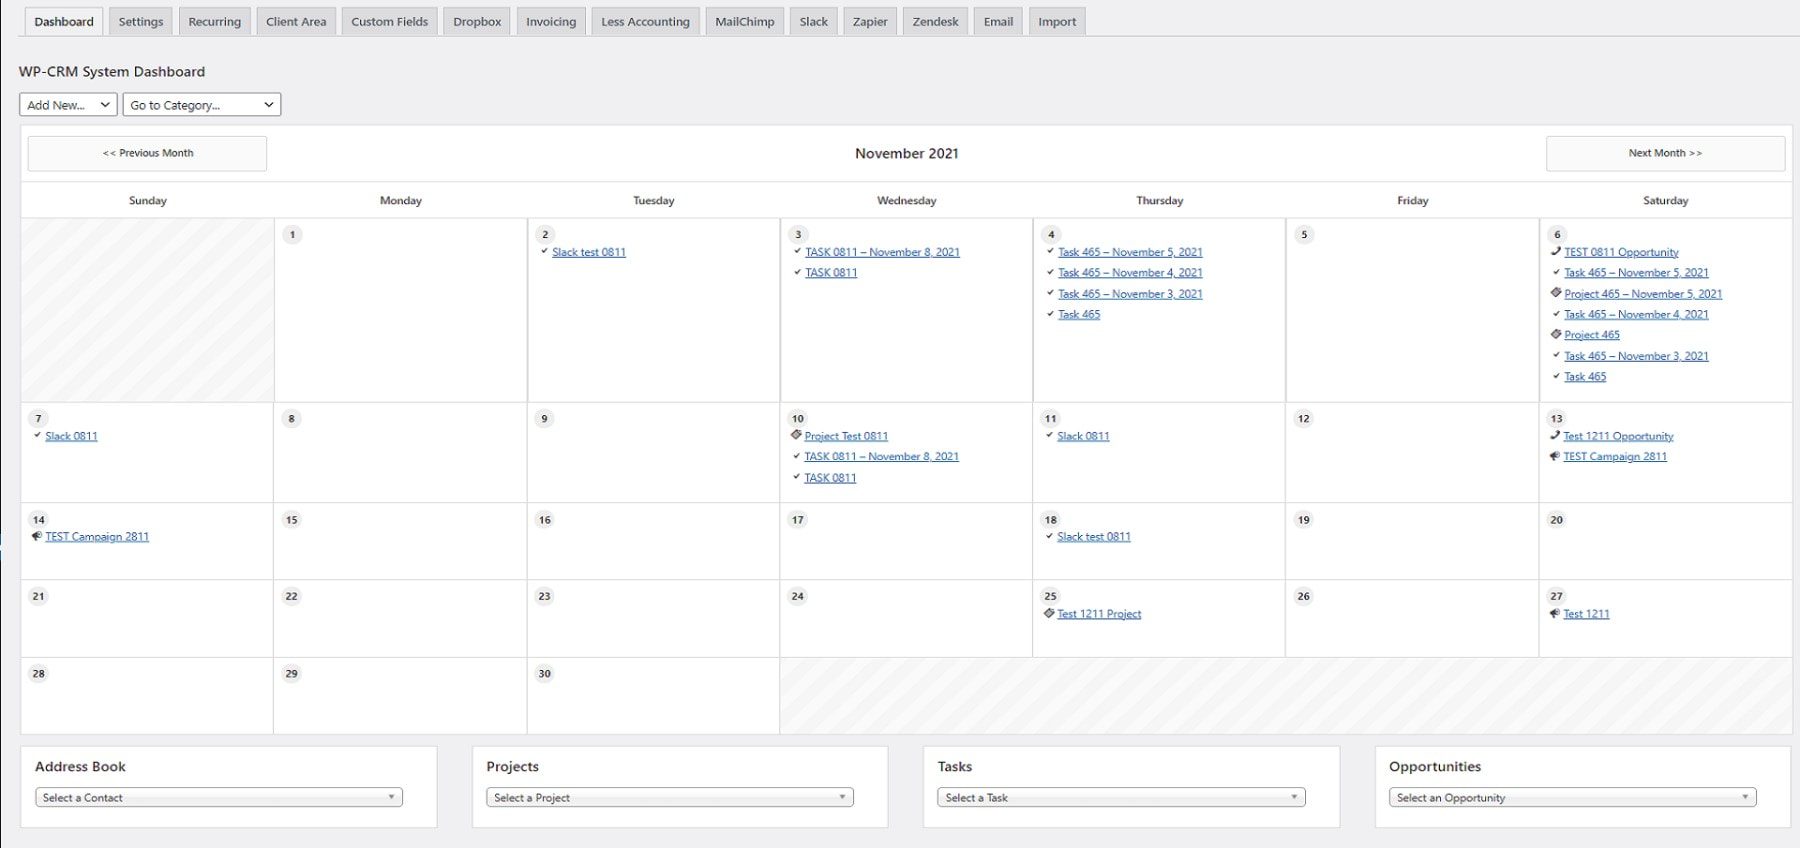 WP-CRM Calendar View of Tasks and Projects